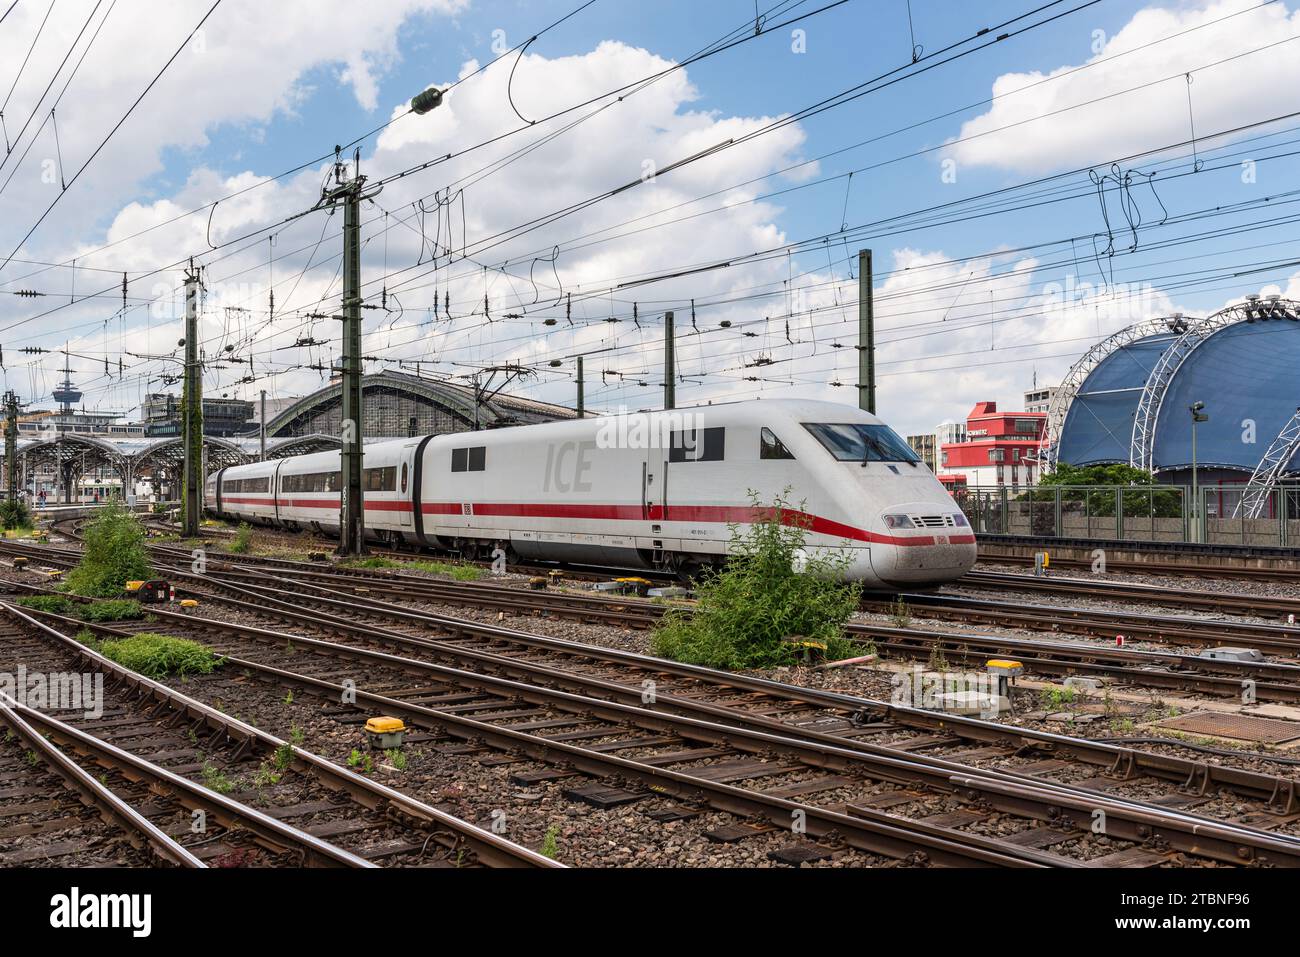 Cologne (Köln), Germany - June 11, 2022: Back view of the Cologne Central Station with steel construction, railway track and the high-speed ICE train Stock Photo